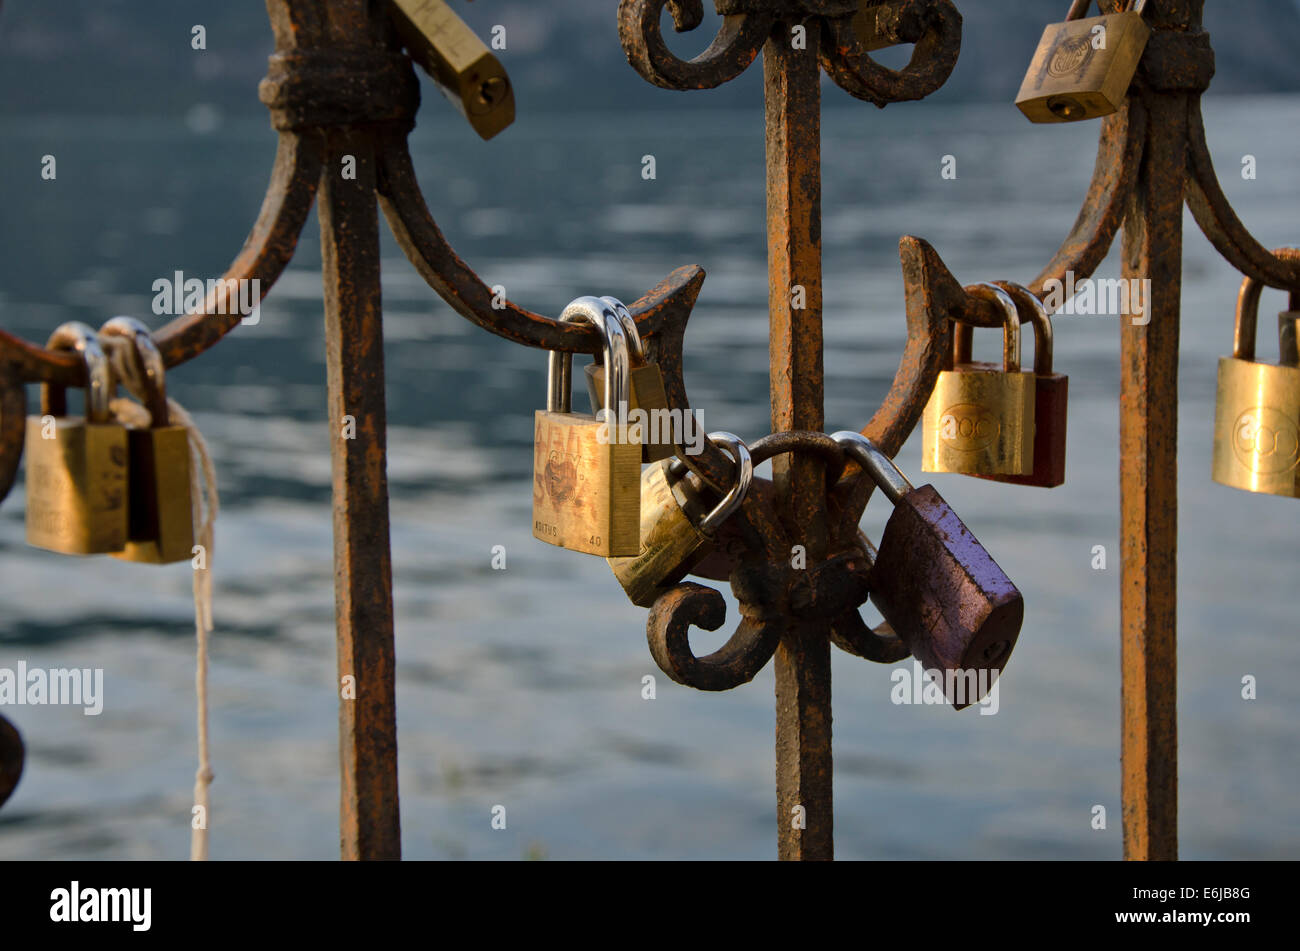 Love locks or padlocks at a fence in Iseo, Lombardy, Italy. Stock Photo